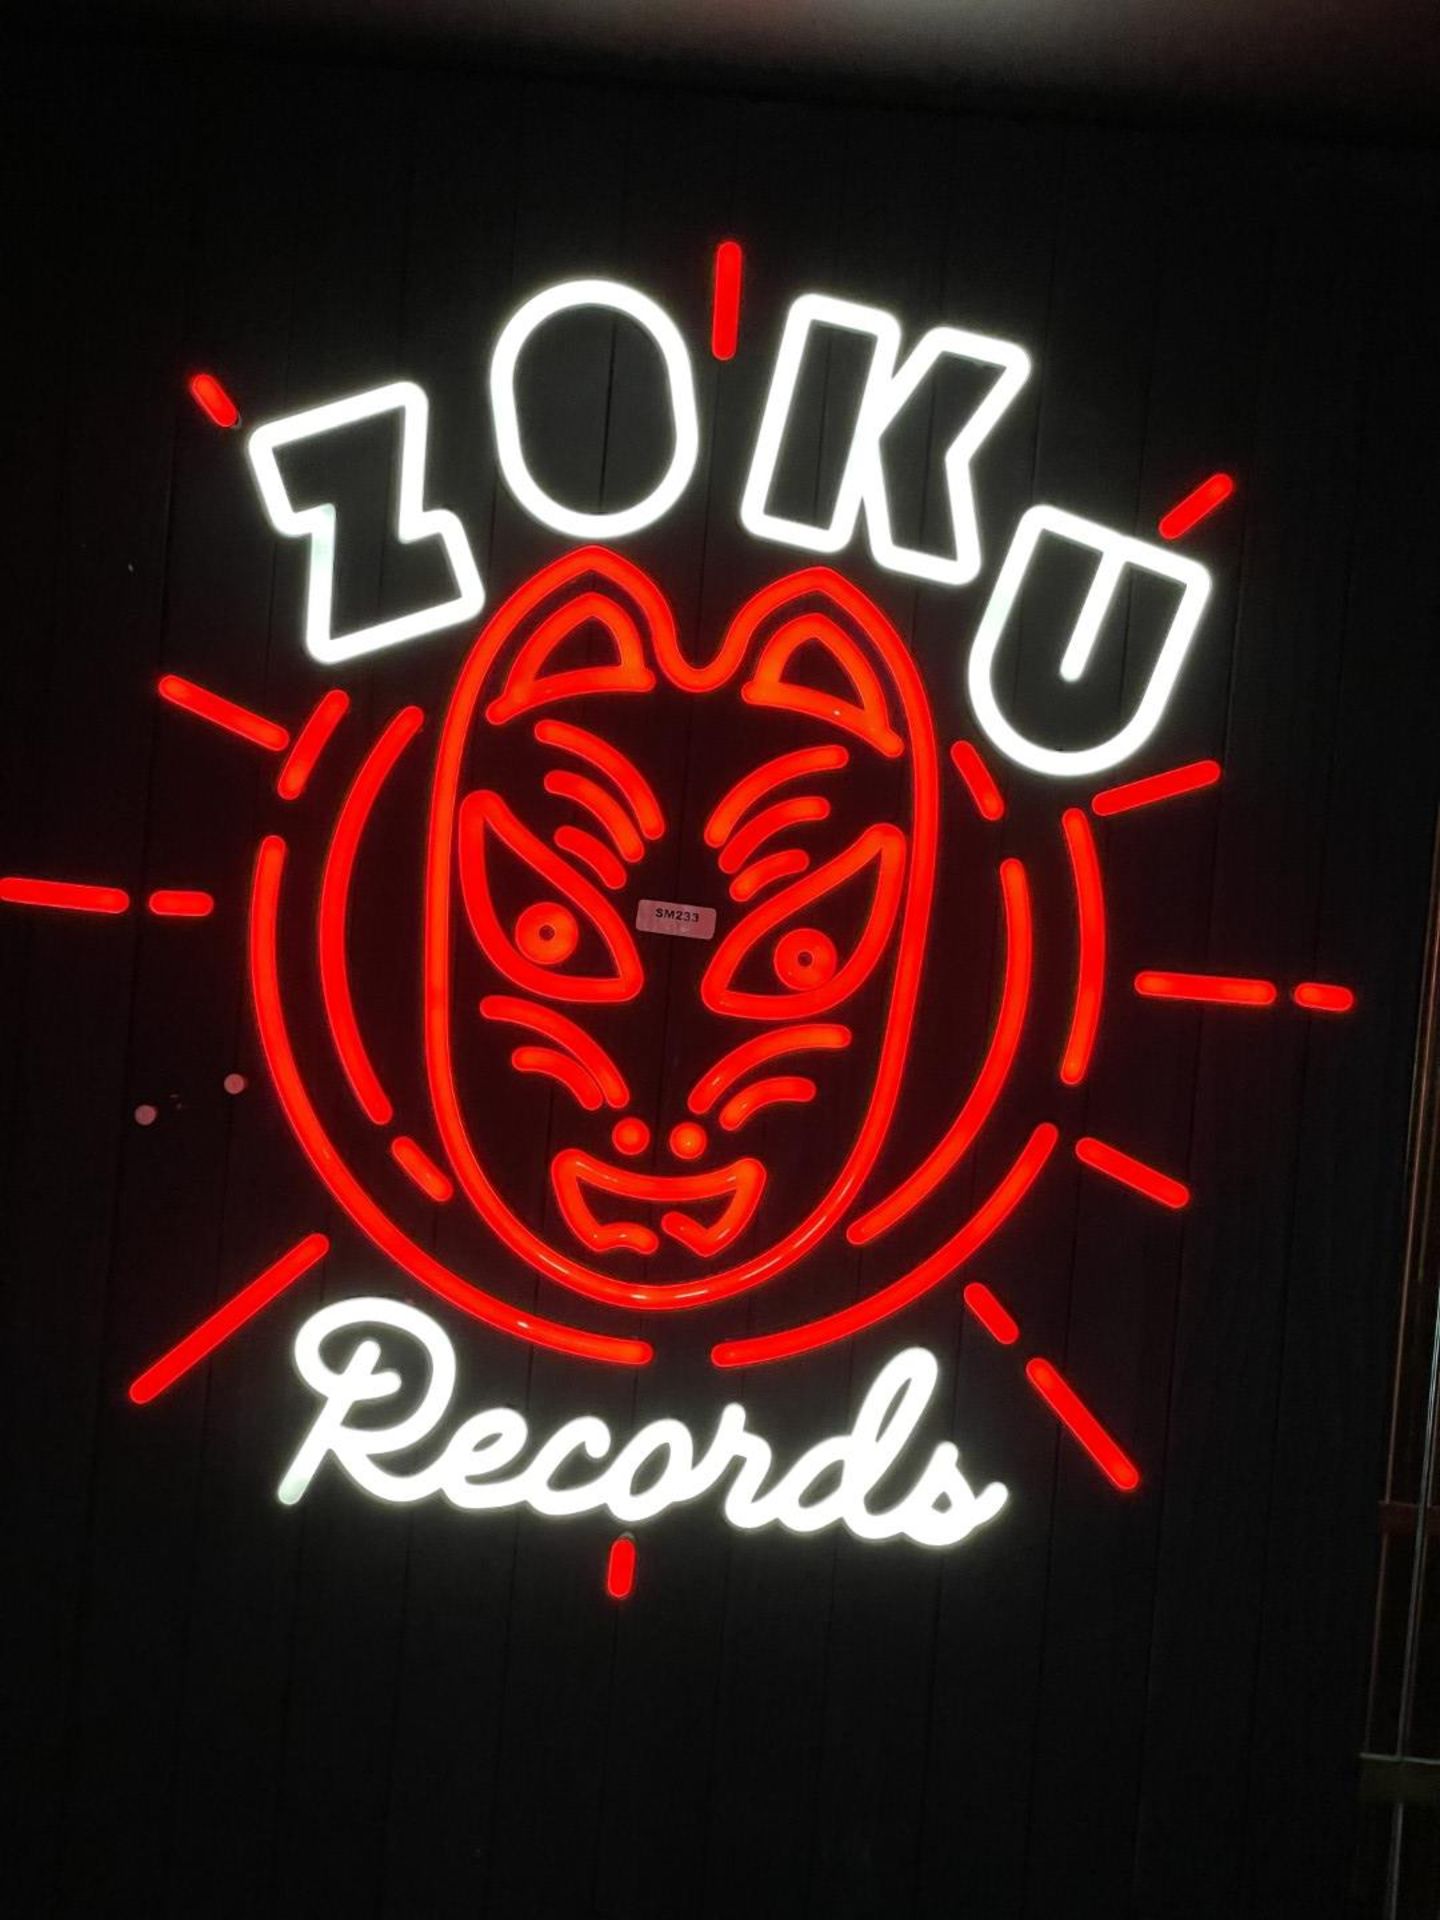 1 x RED NEON Illuminated Wall Sign ZOKU RECORDS Mounted on a Black Wooden Wall Panel